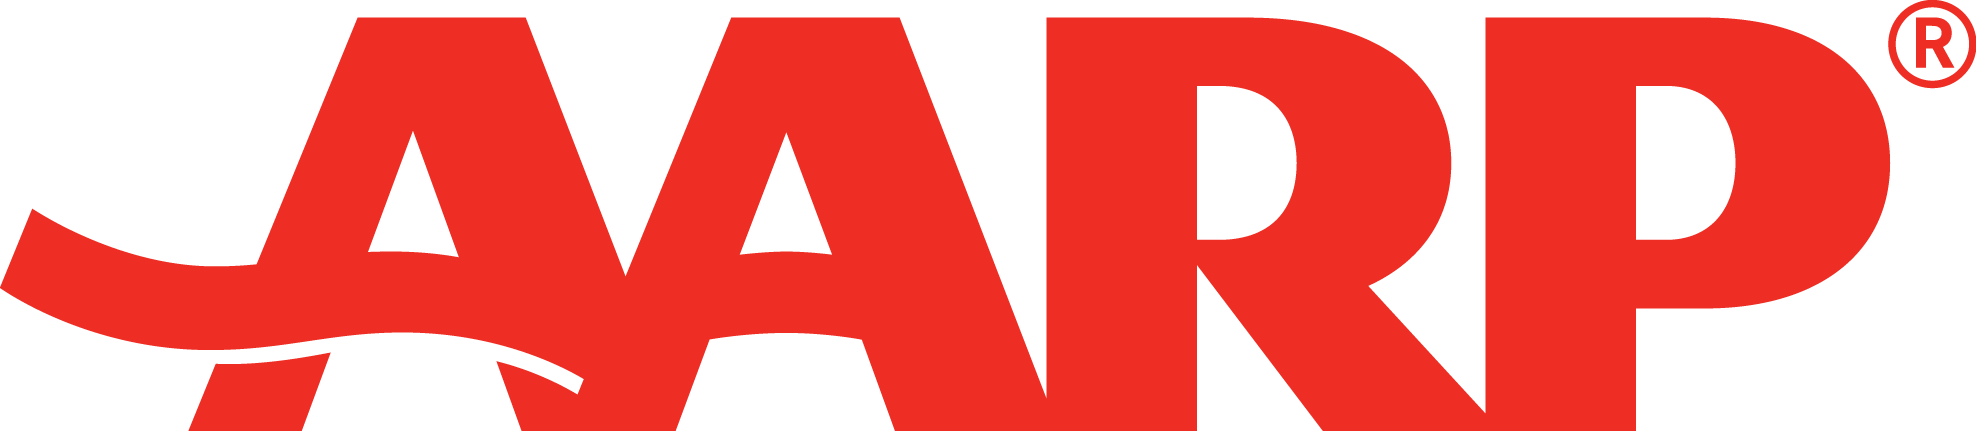 AARP Red.png, Aarp PNG - Free PNG